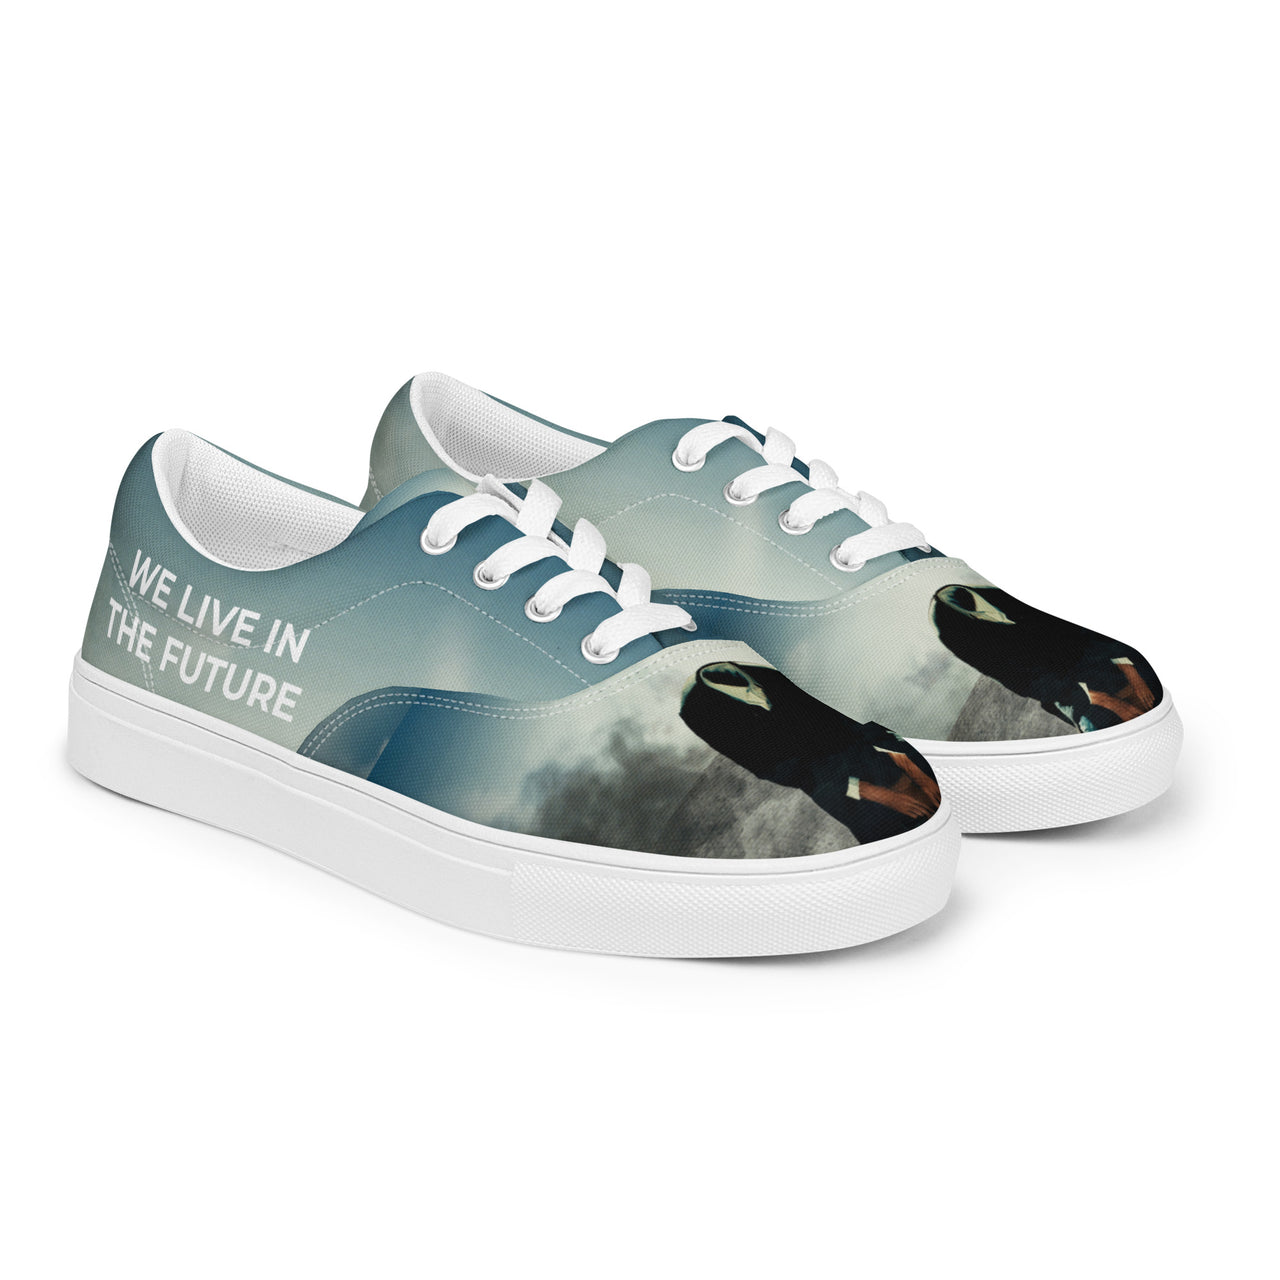 Women’s lace-up canvas shoes - Hollow Poet Design Special Edition from WE LIVE IN THE FUTURE